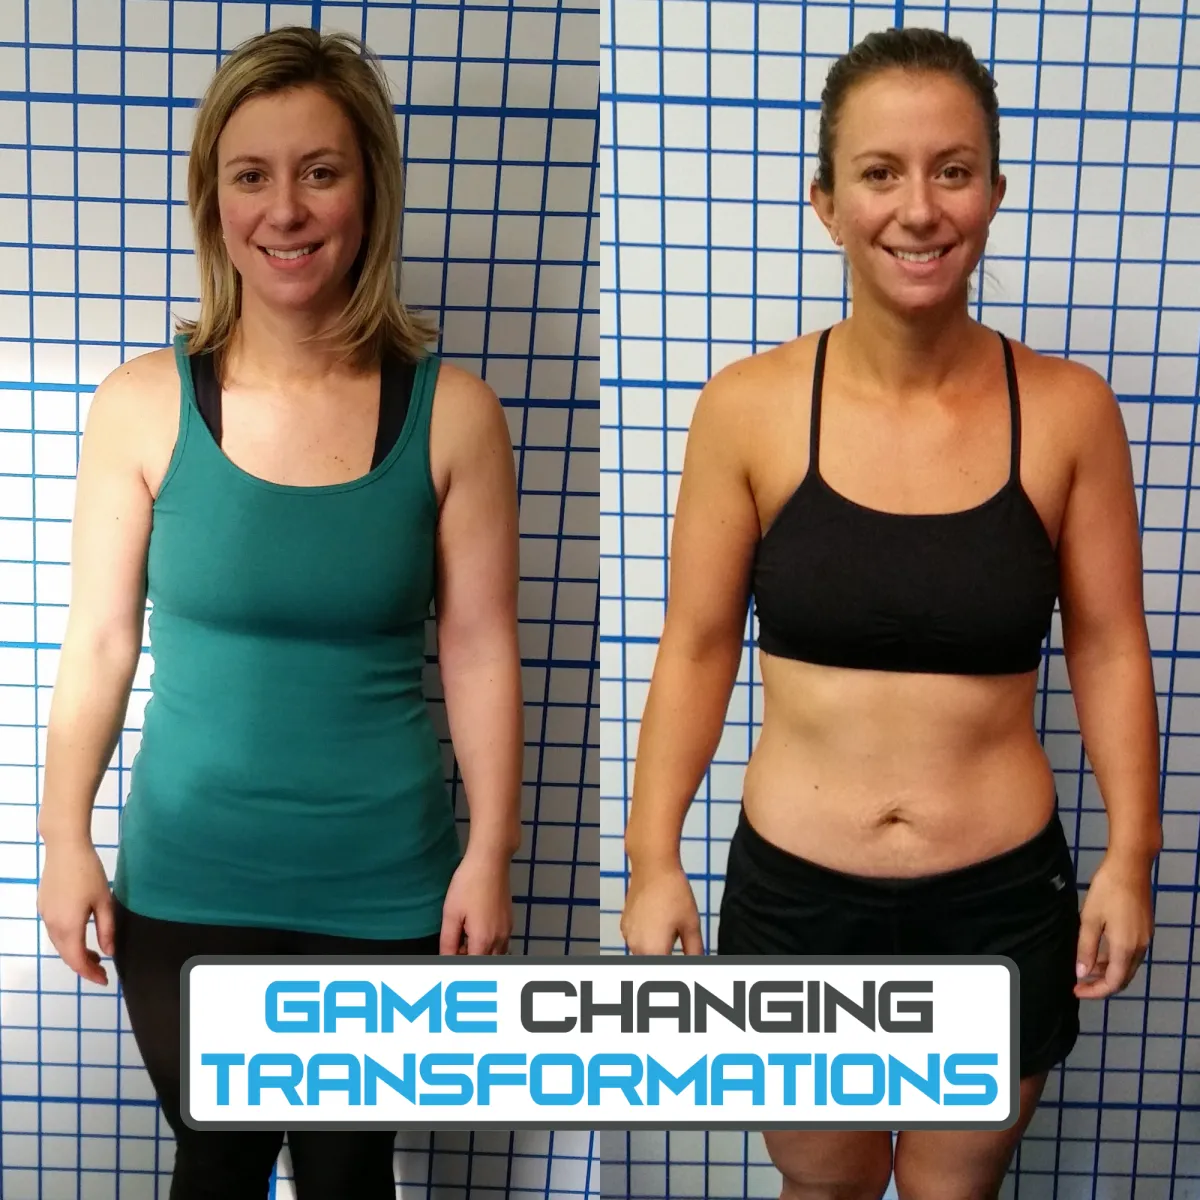 Premier weight loss facility for transformations in Libertyville